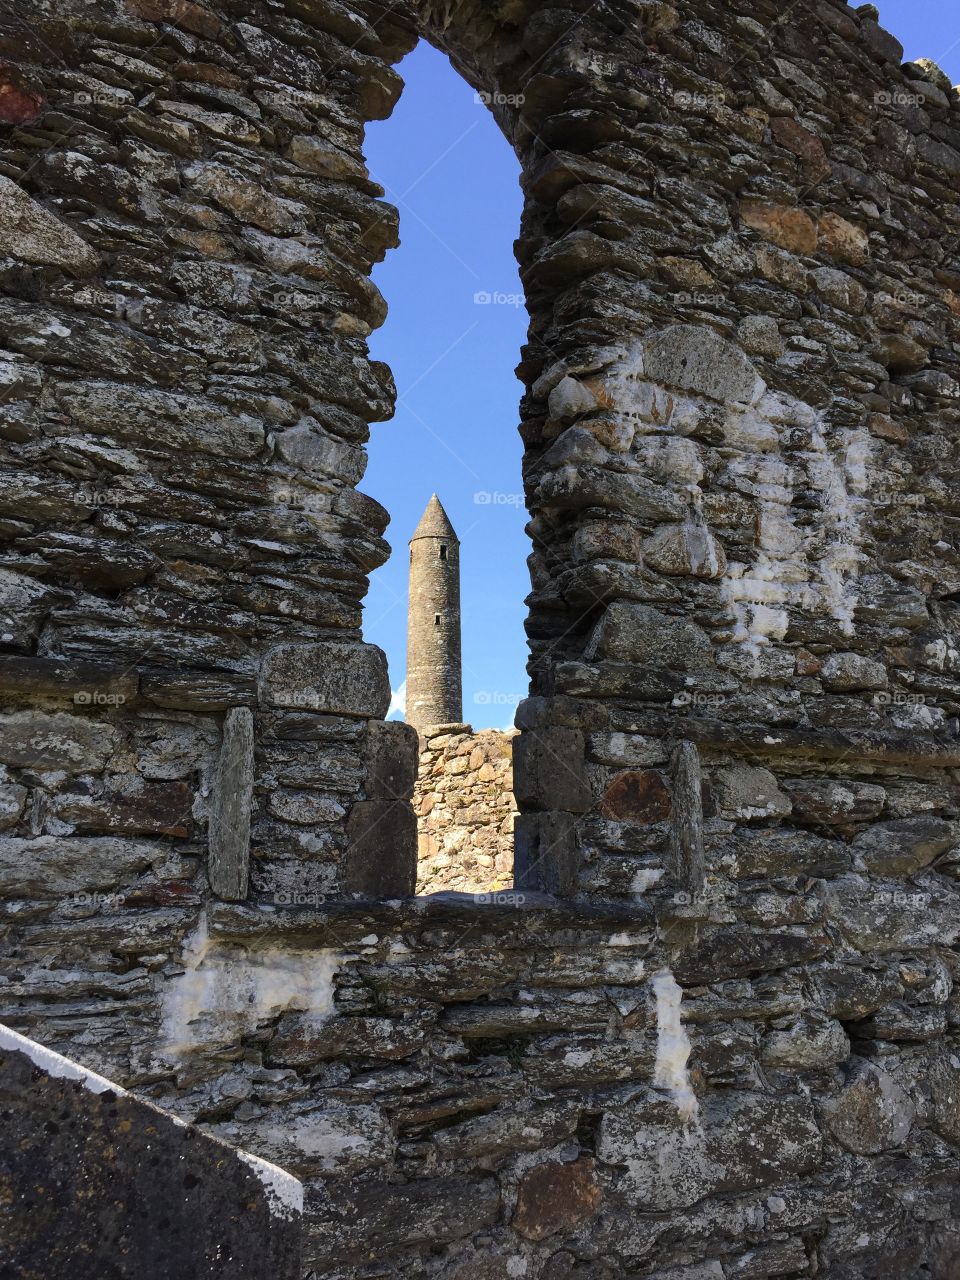 Glendalough . A monk's tower at Glendalough in County Wicklow, Ireland.